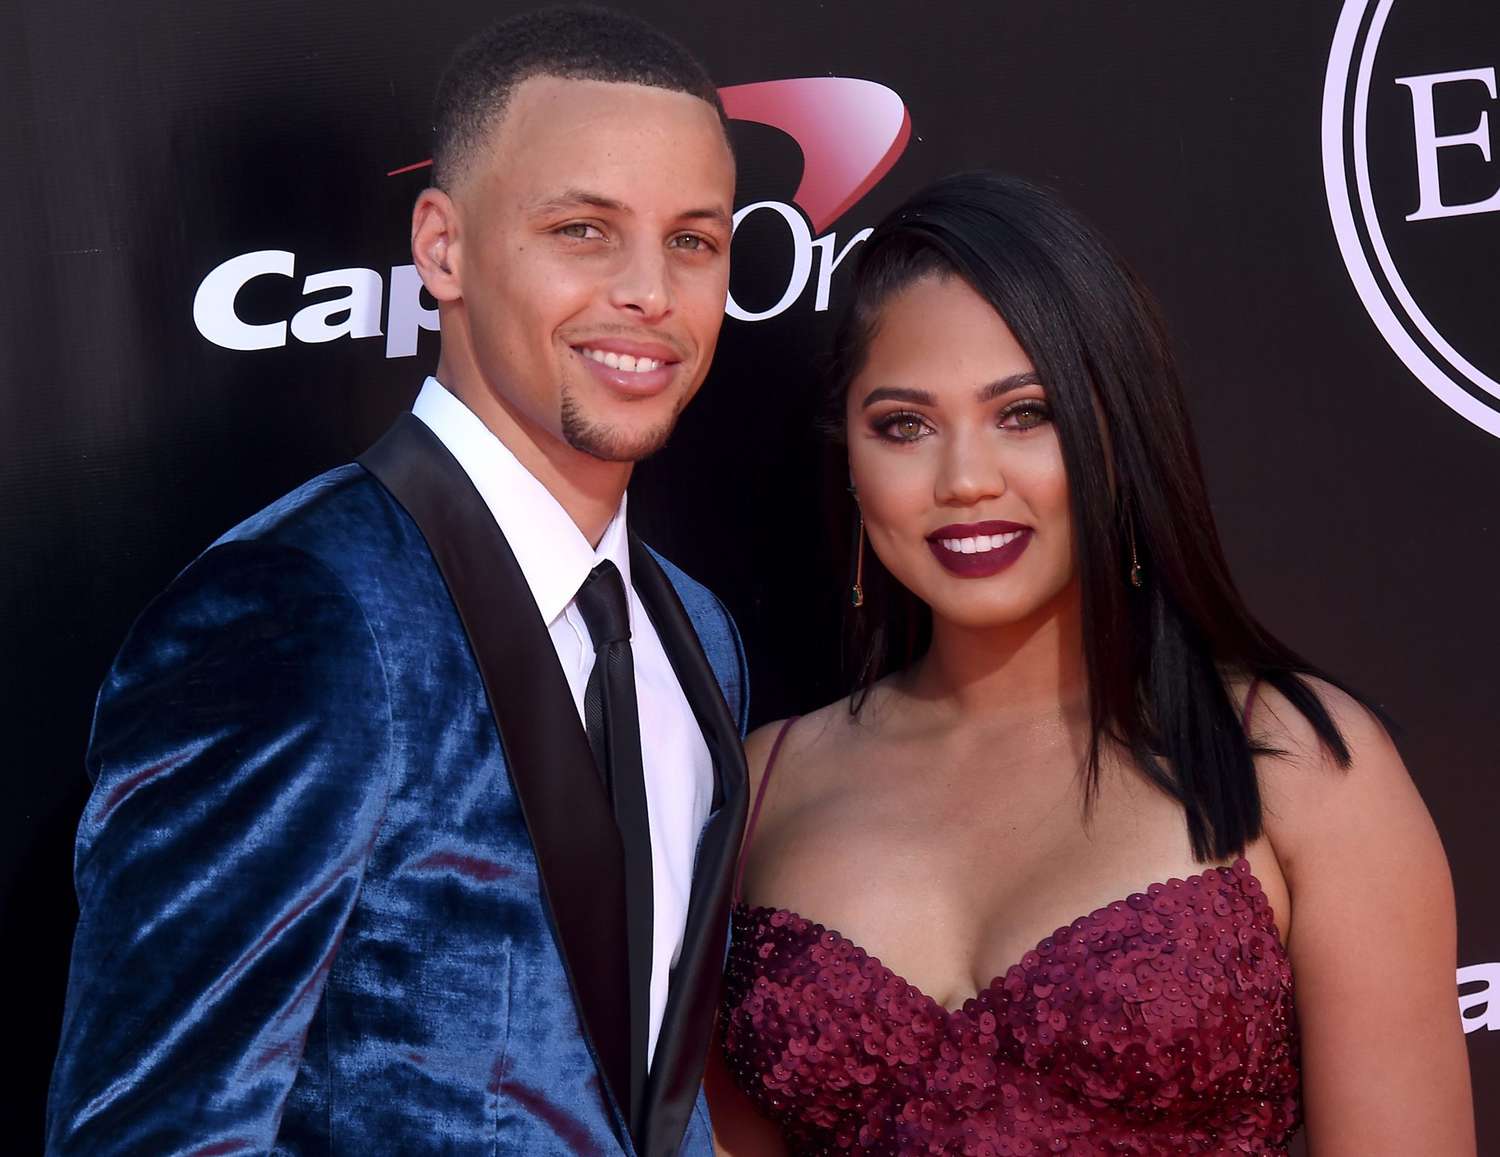 An image of Steph and Ayesha Curry